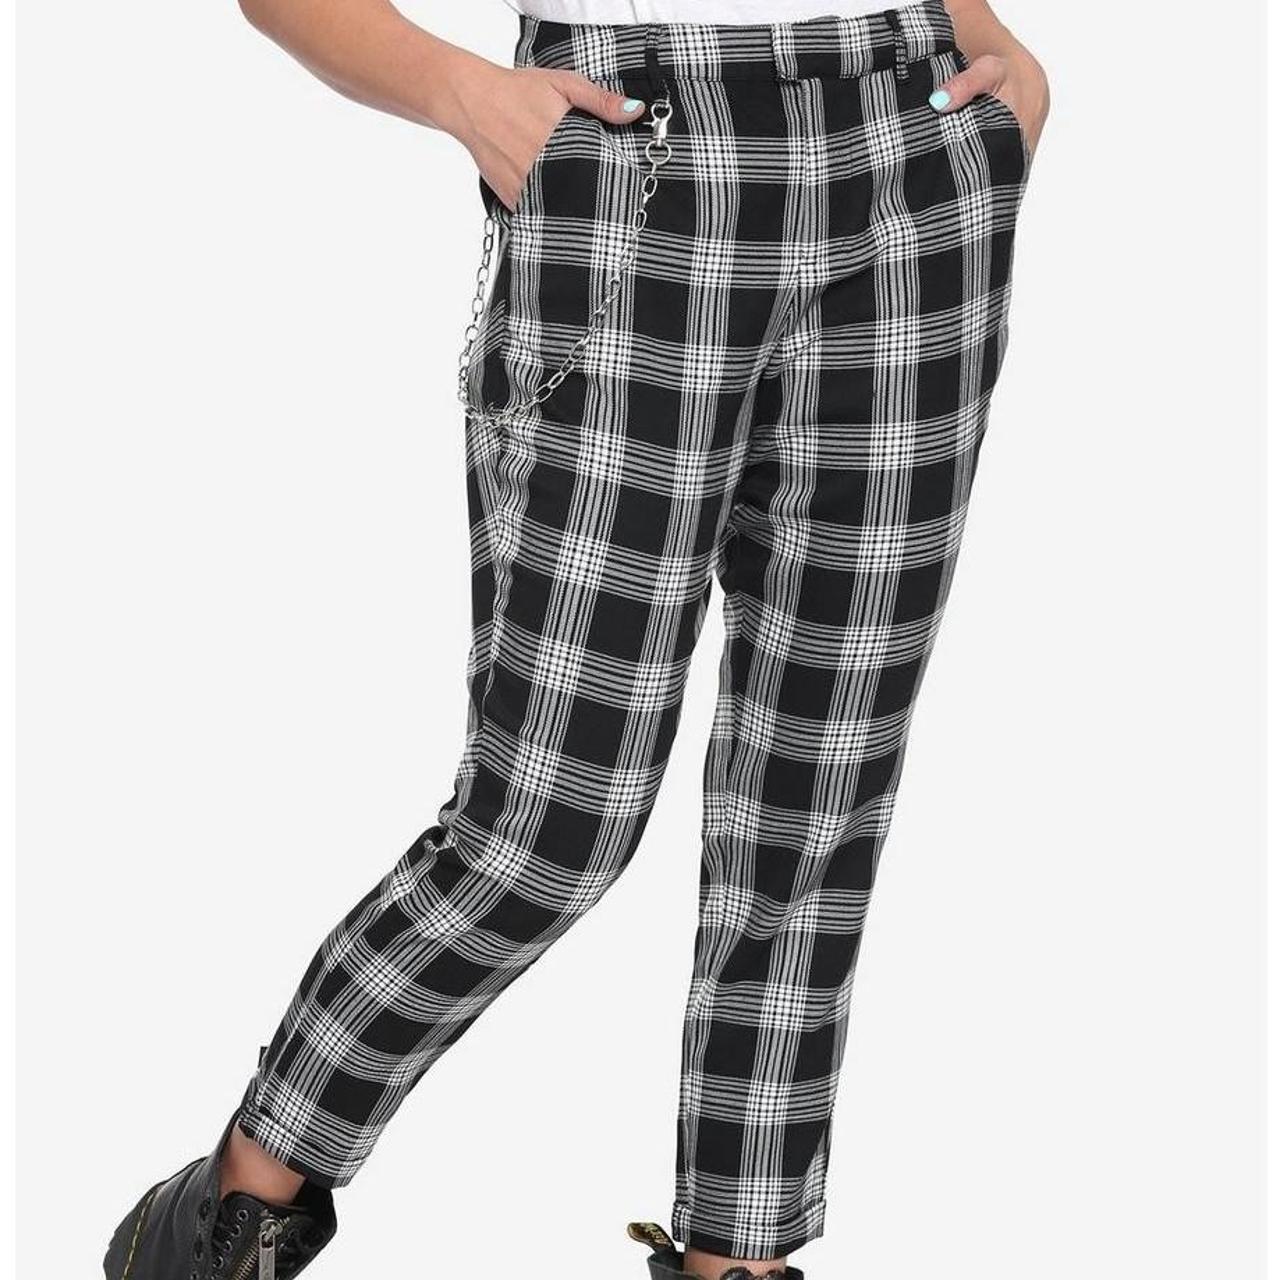 Hot Topic black and white plaid pants with chain